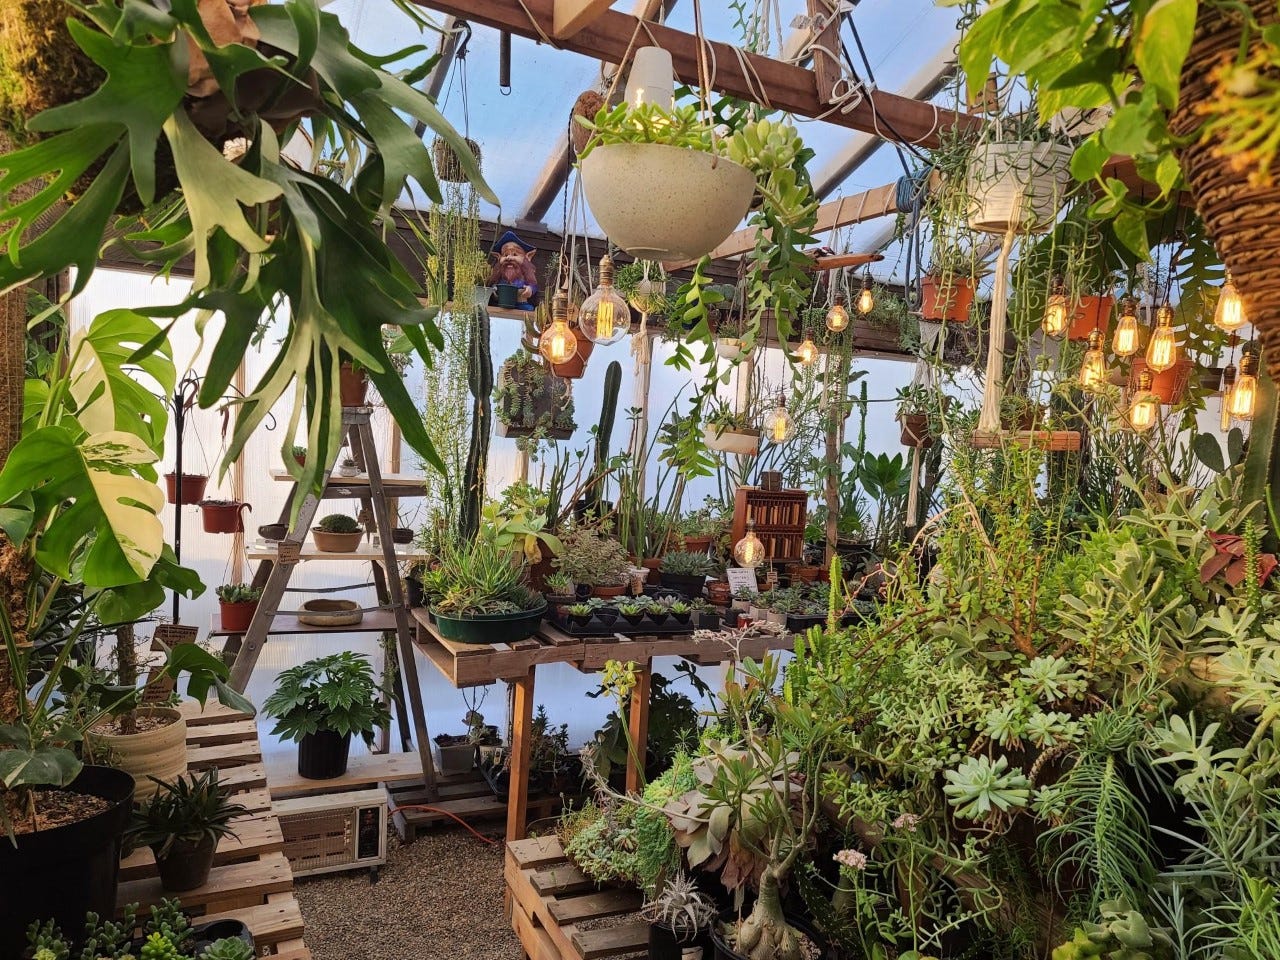 Rare Plant Shop The Deku Tree Expanding To Downtown Sioux Falls